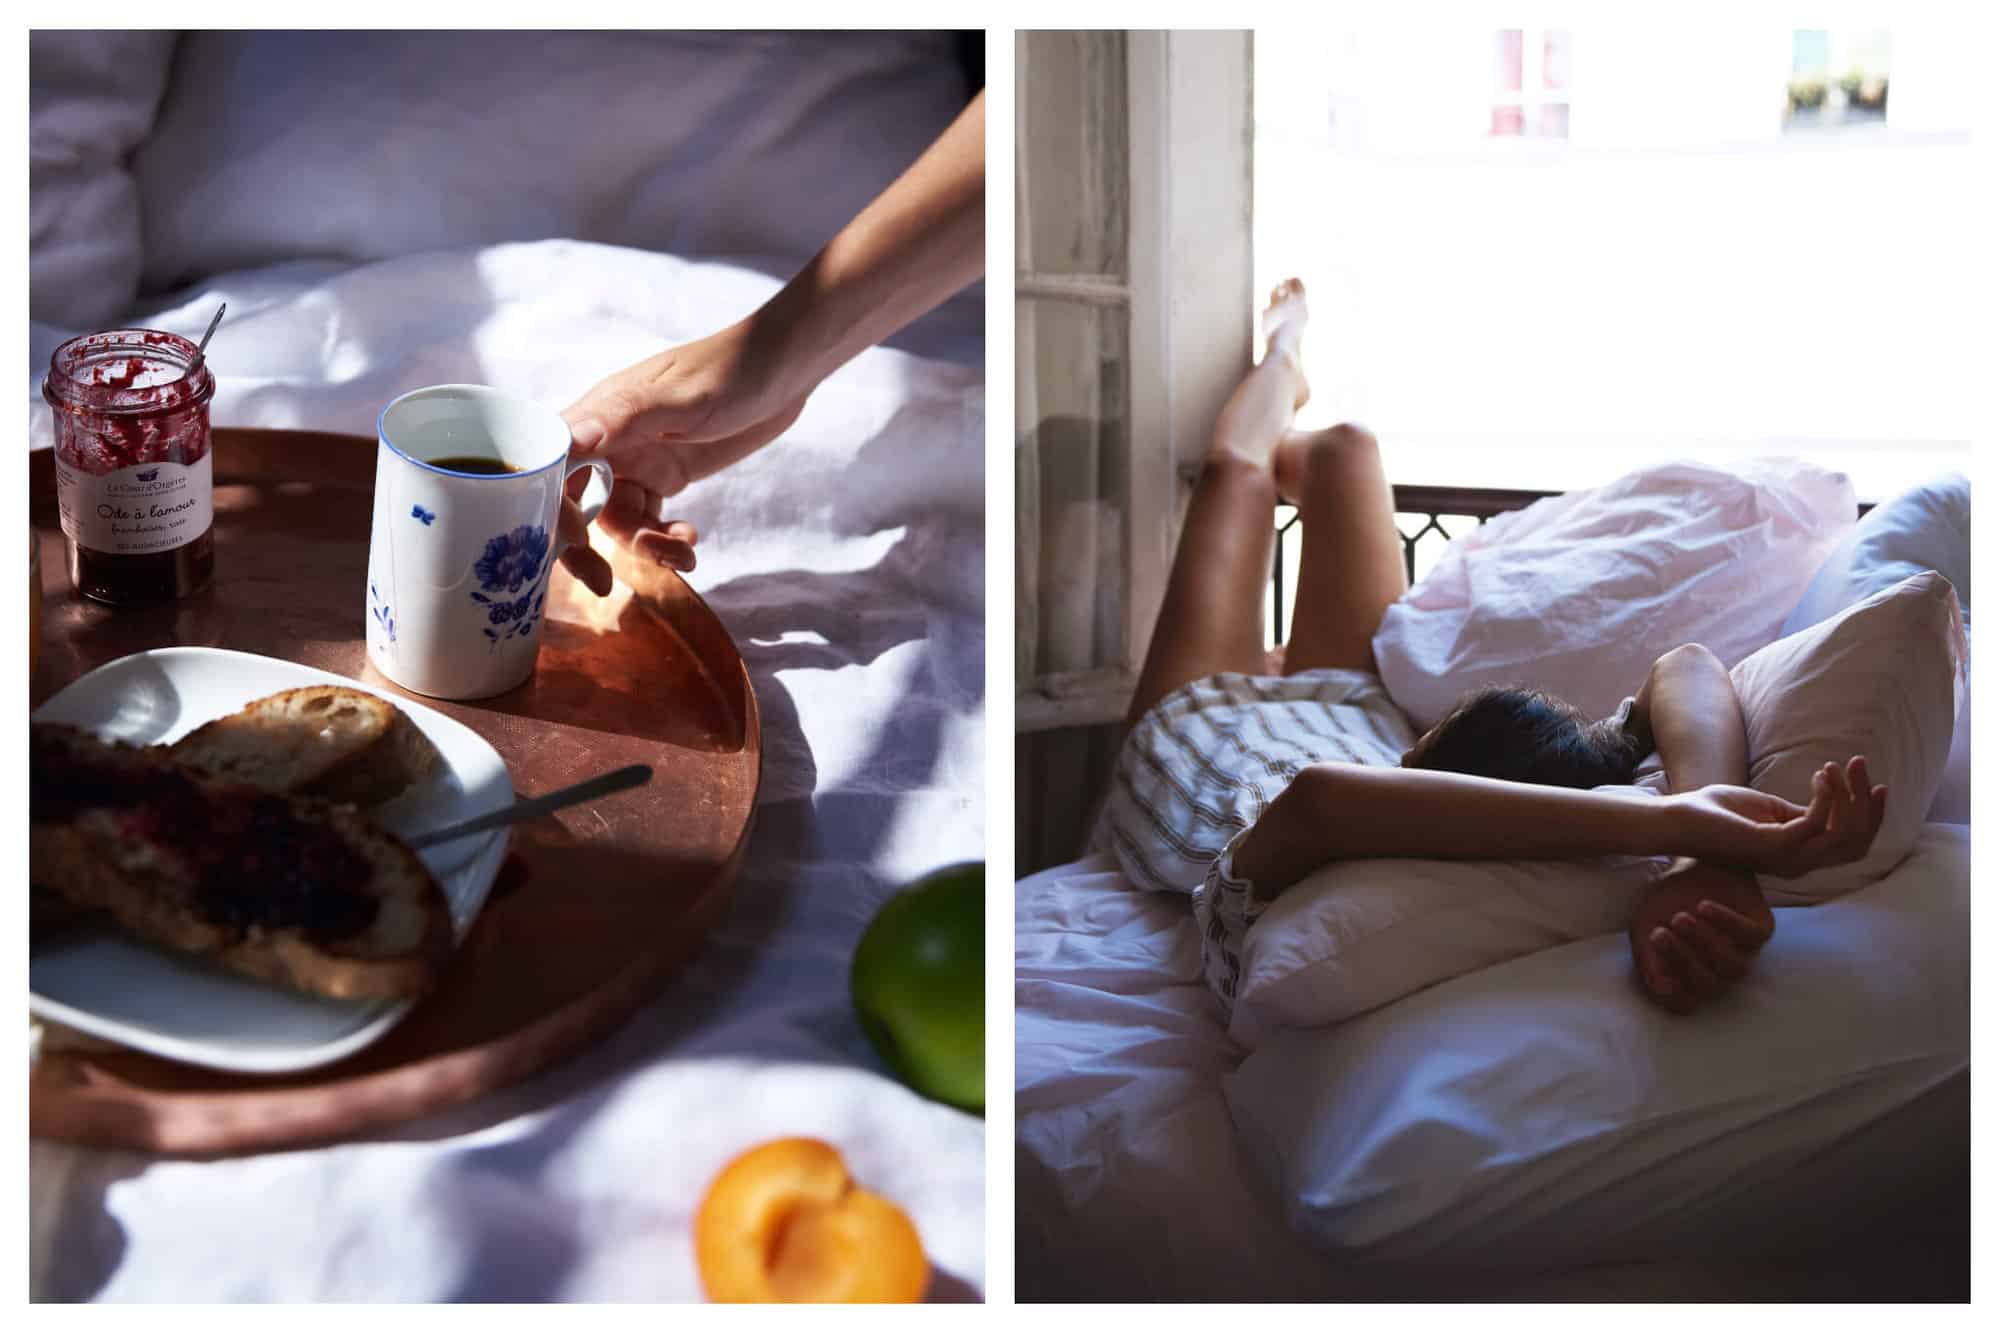 Left: A white bed is pictured with a tray on top. On the tray, there is a plate with toast, a mug filled with coffee and an open container of jam. An arm is visible, reaching for the cup of coffee. Right: A woman is lying on an unmade bed, with her legs hanging off the balcony. 